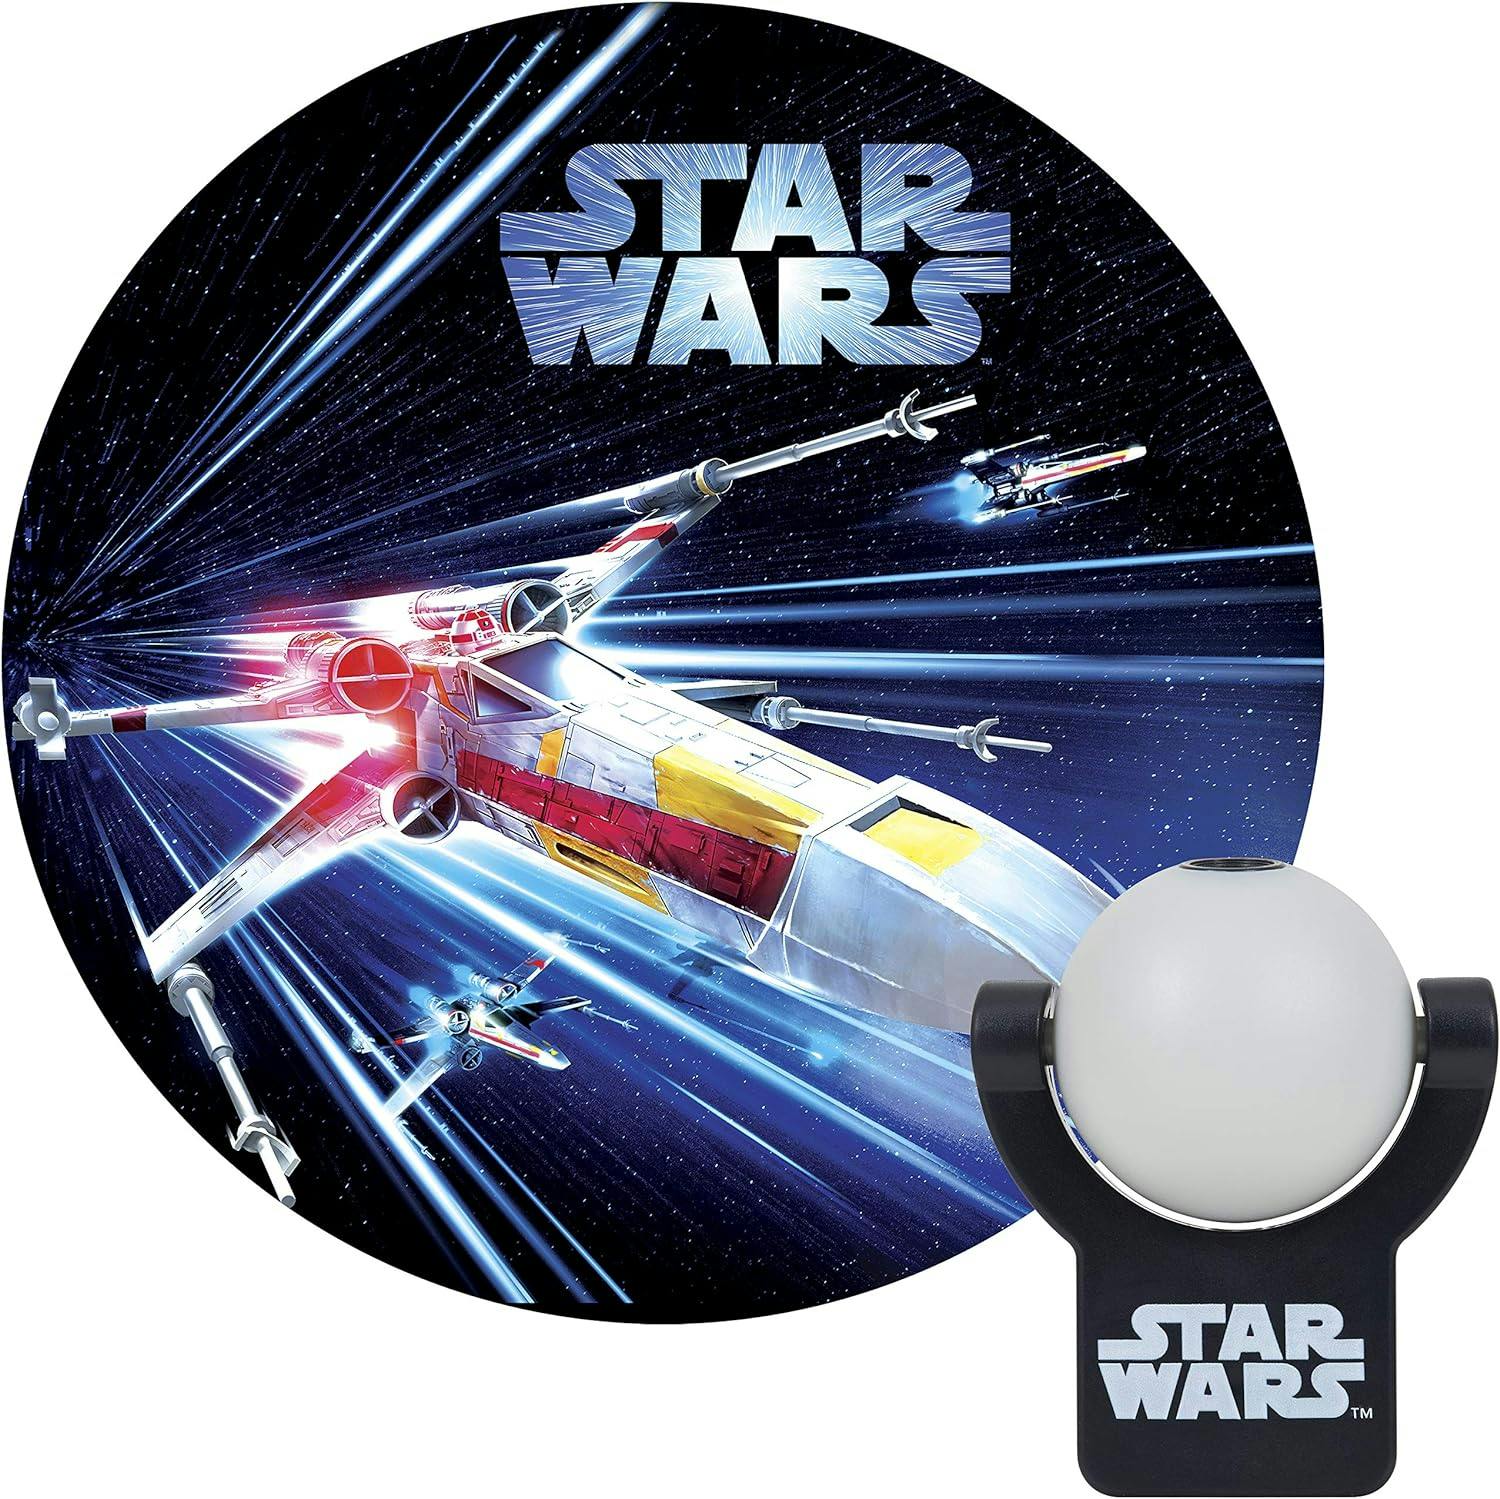 Star Wars X-Wing Fighter Automatic Projectable Night Light